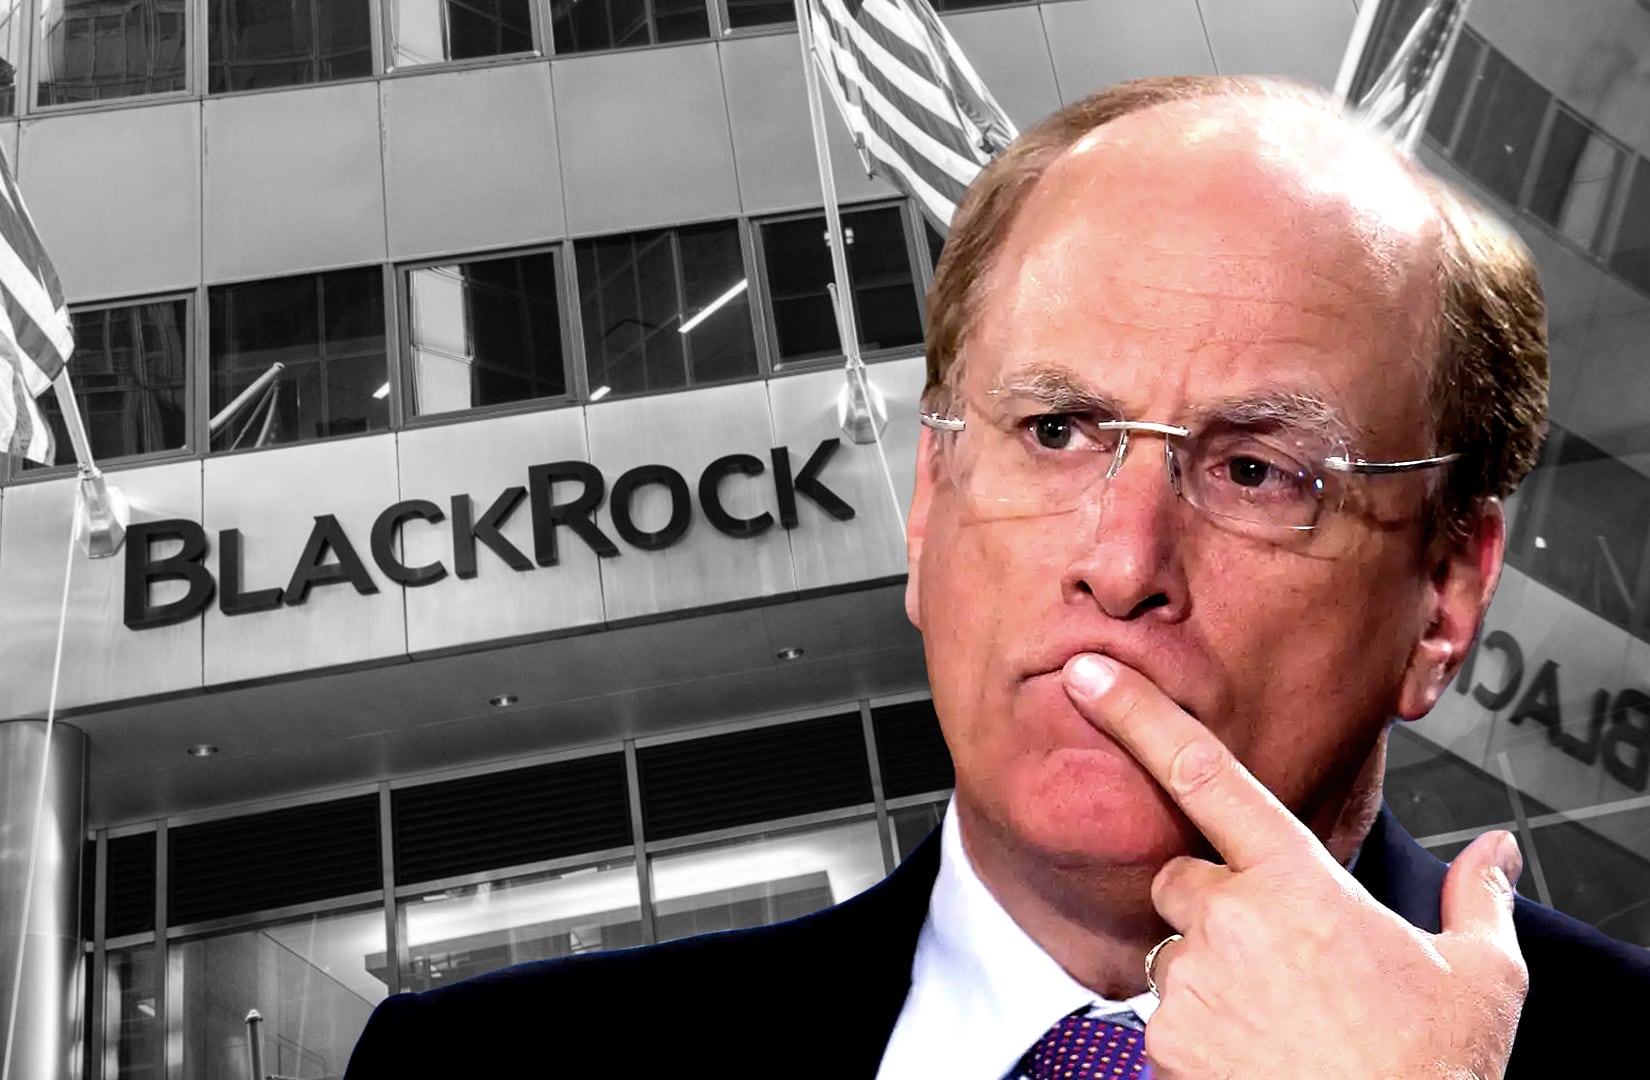 BlackRock’s BUIDL surged 200% in weeks — but it has fewer than 11 holders